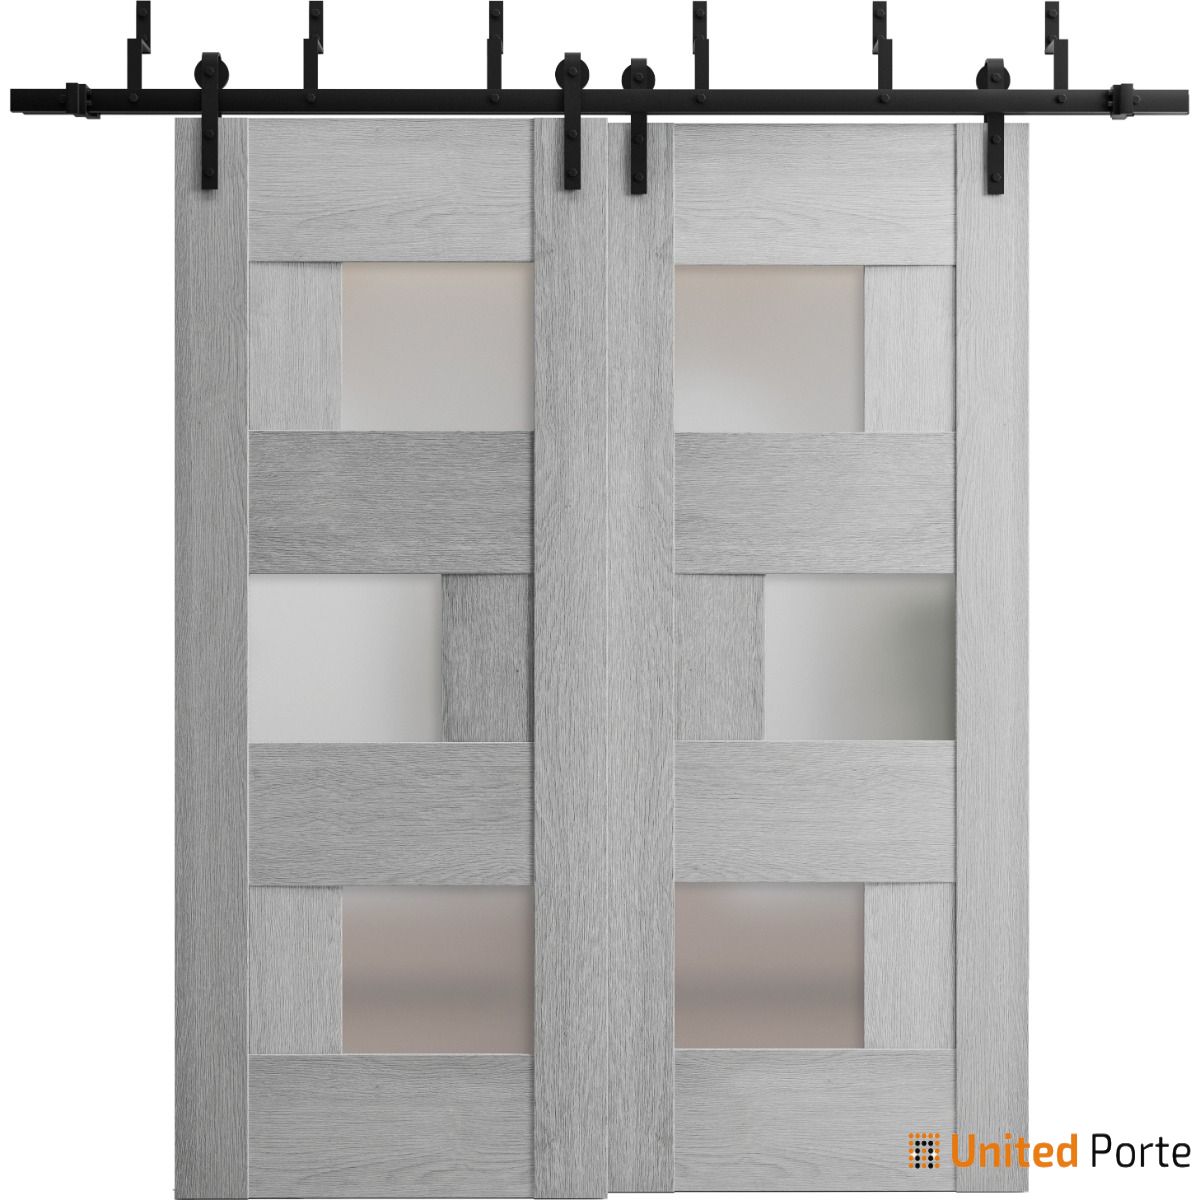 Sete 6933 Light Grey Oak Double Barn Door with Frosted Glass and Black Bypass Rail